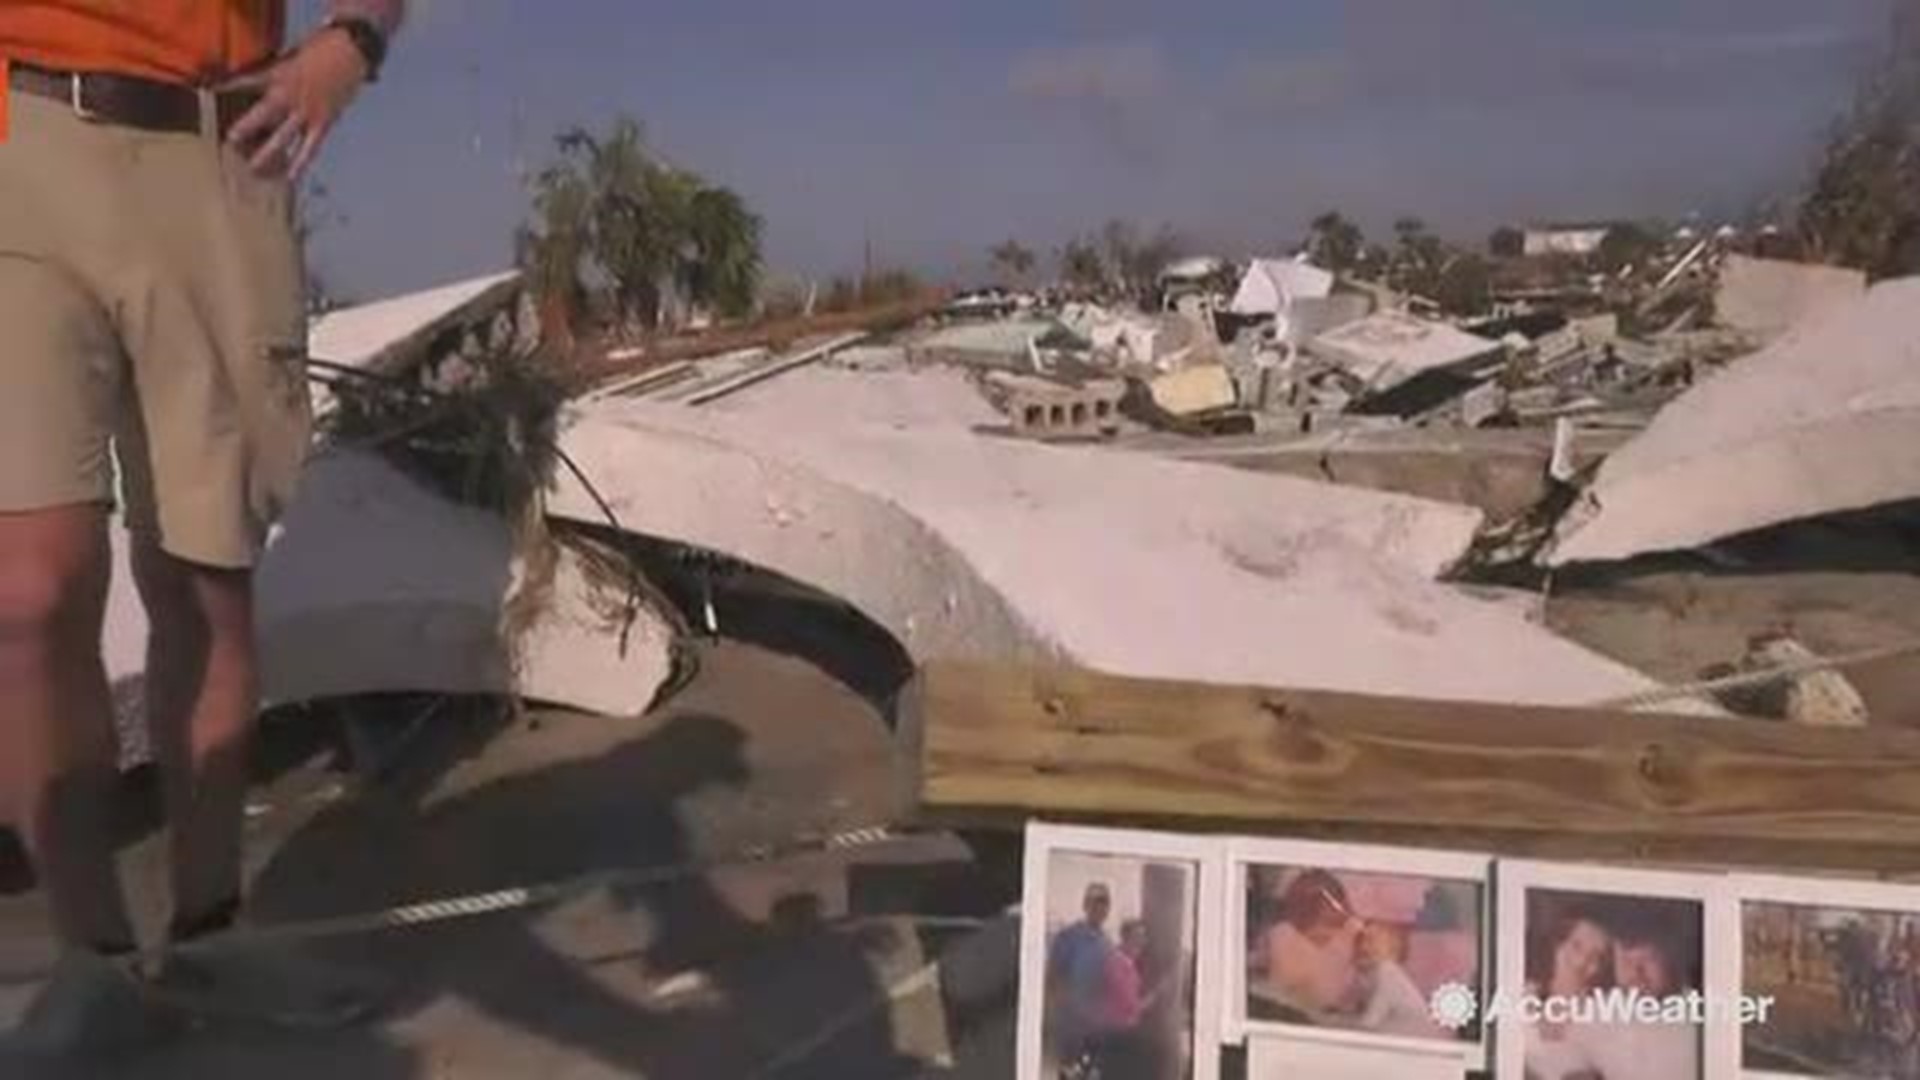 AccuWeather's Jonathan Petramala stands amid utter destruction as he reports on recovery efforts in Mexico Beach, Florida.